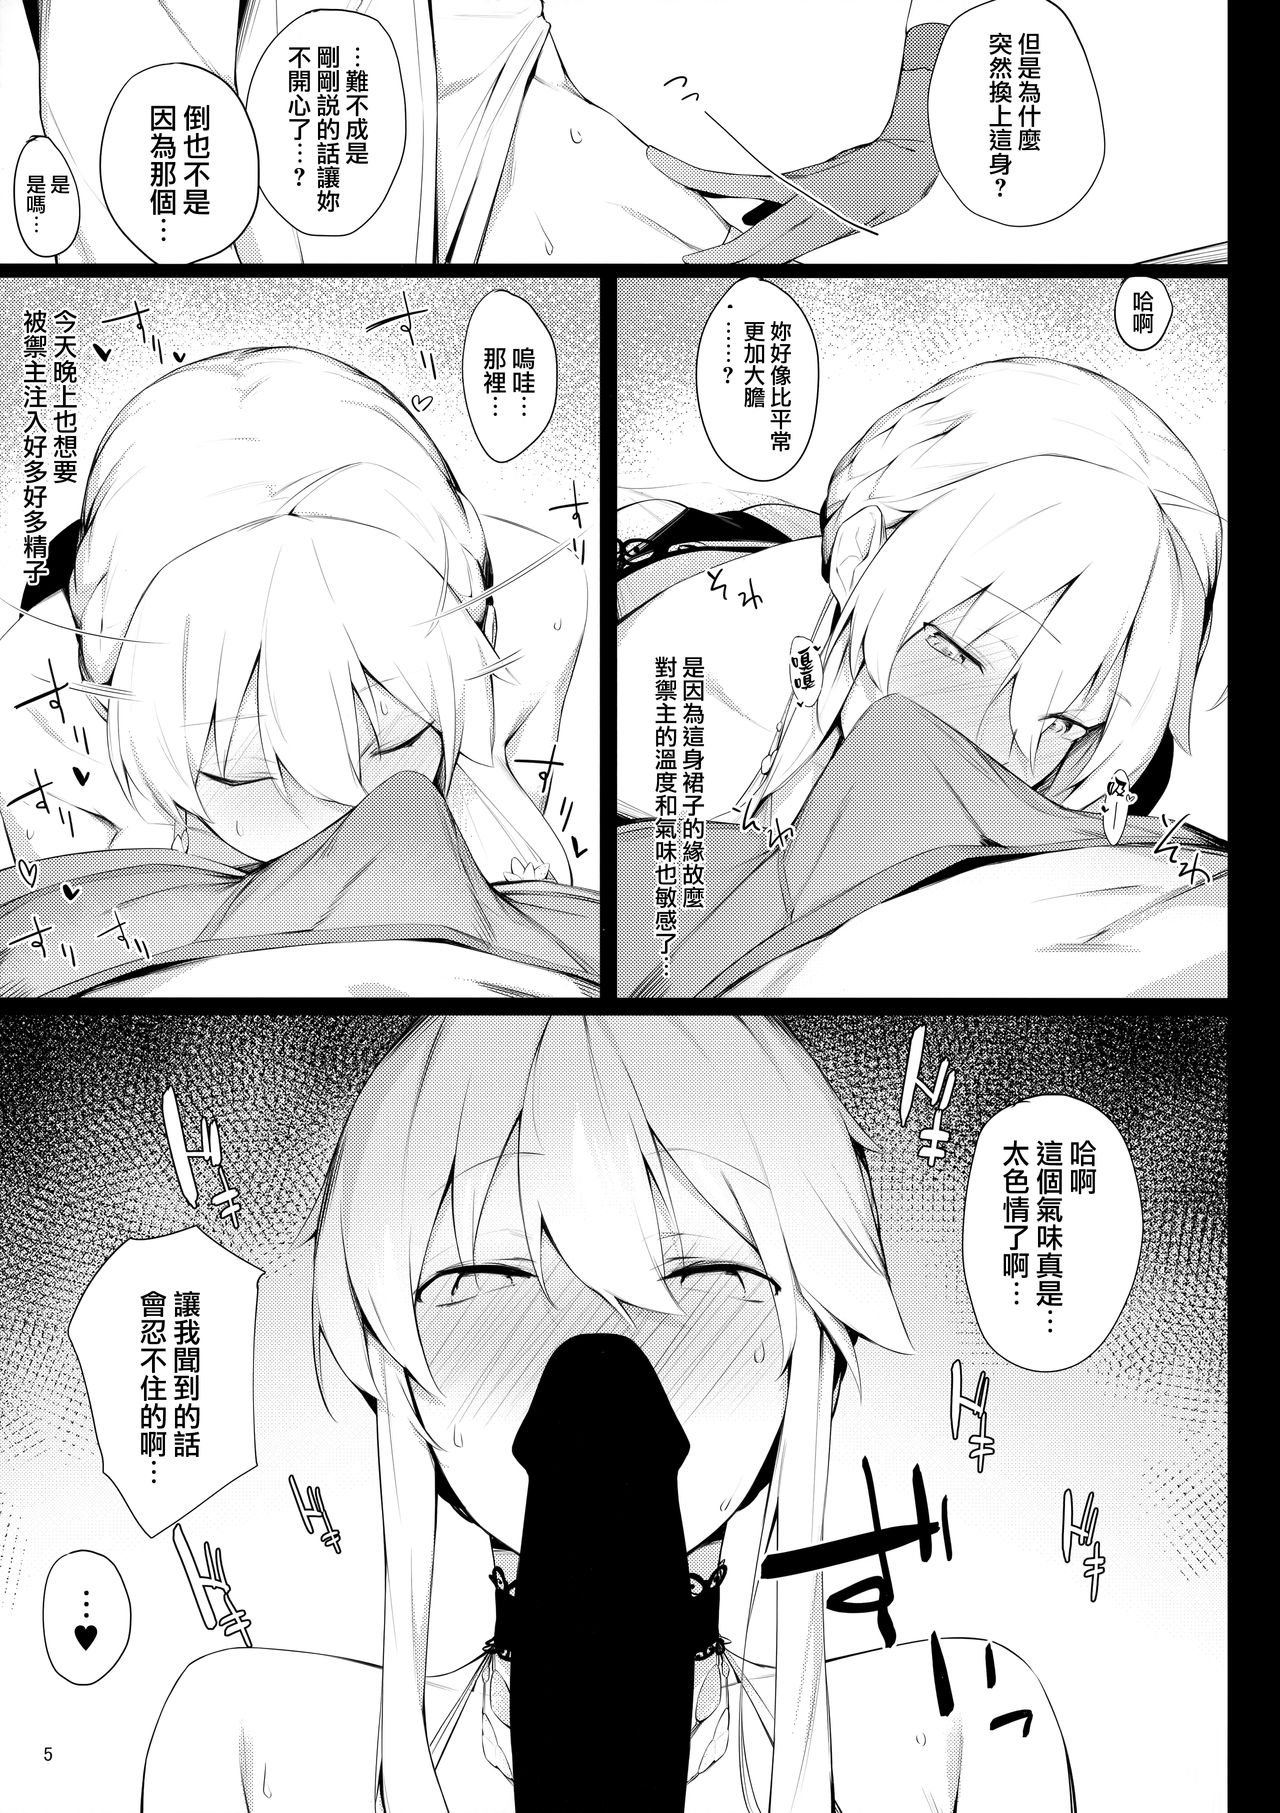 (C95) [Enokiya (eno)] Sultry Altria (Fate/Grand Order) [Chinese] [无毒汉化组] page 5 full